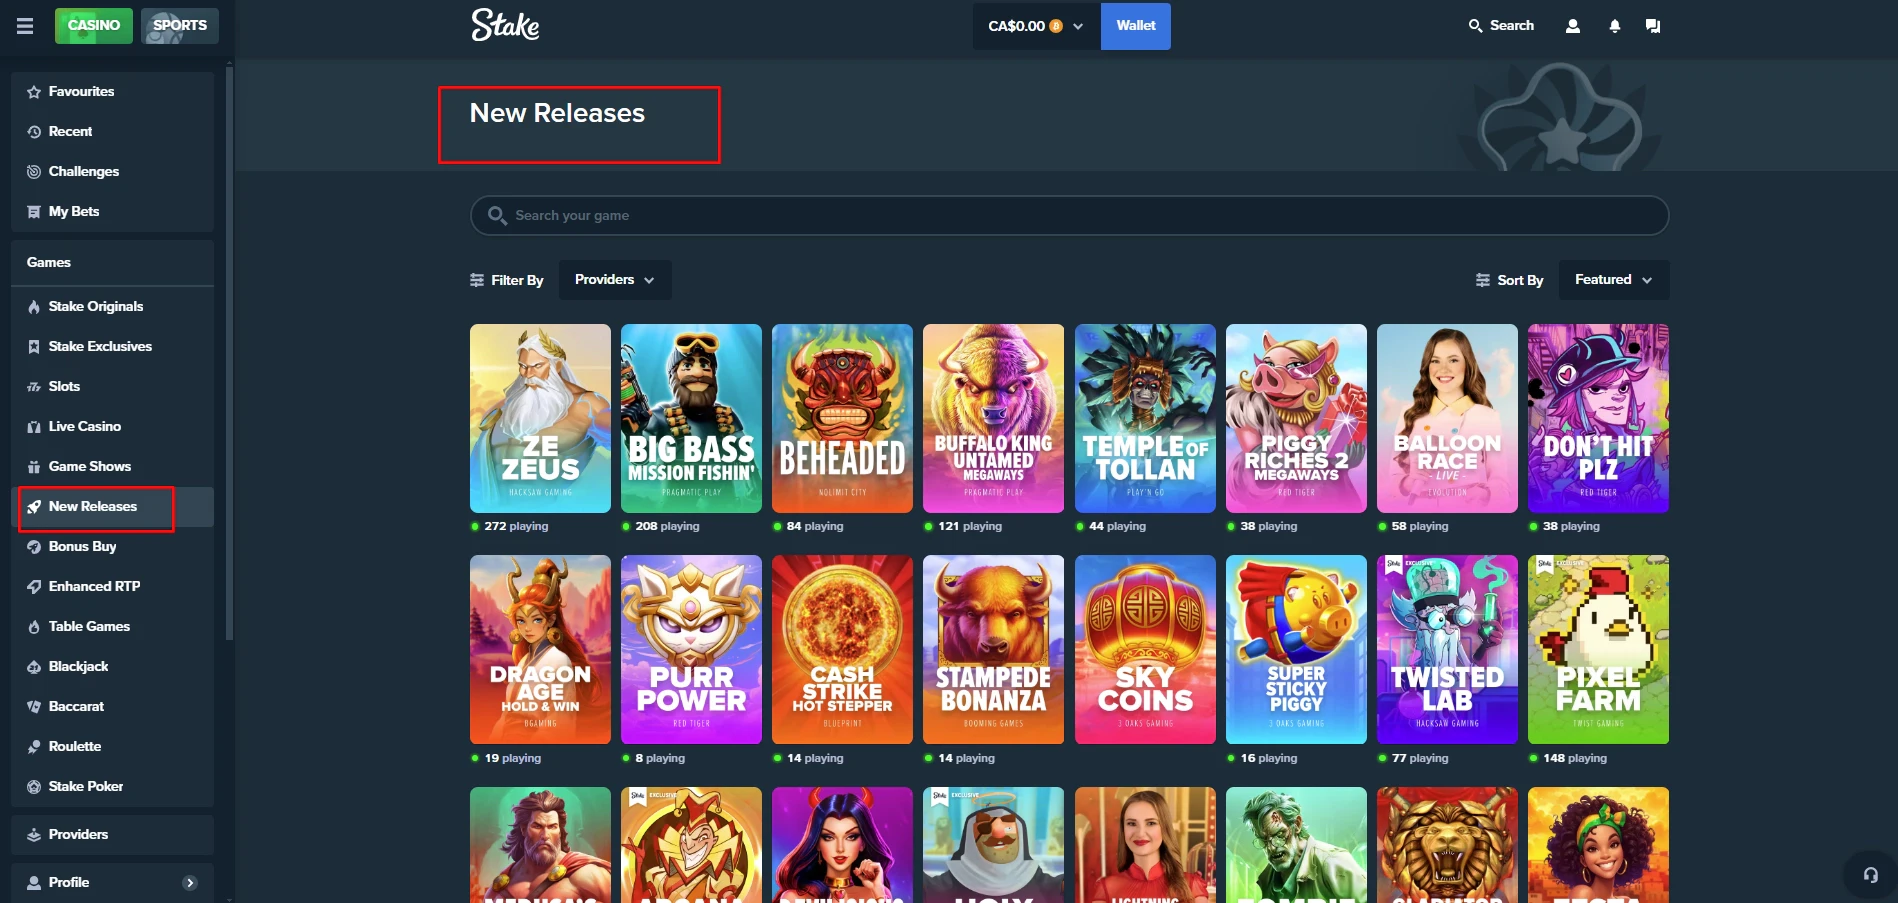 Stake Casino New Releases